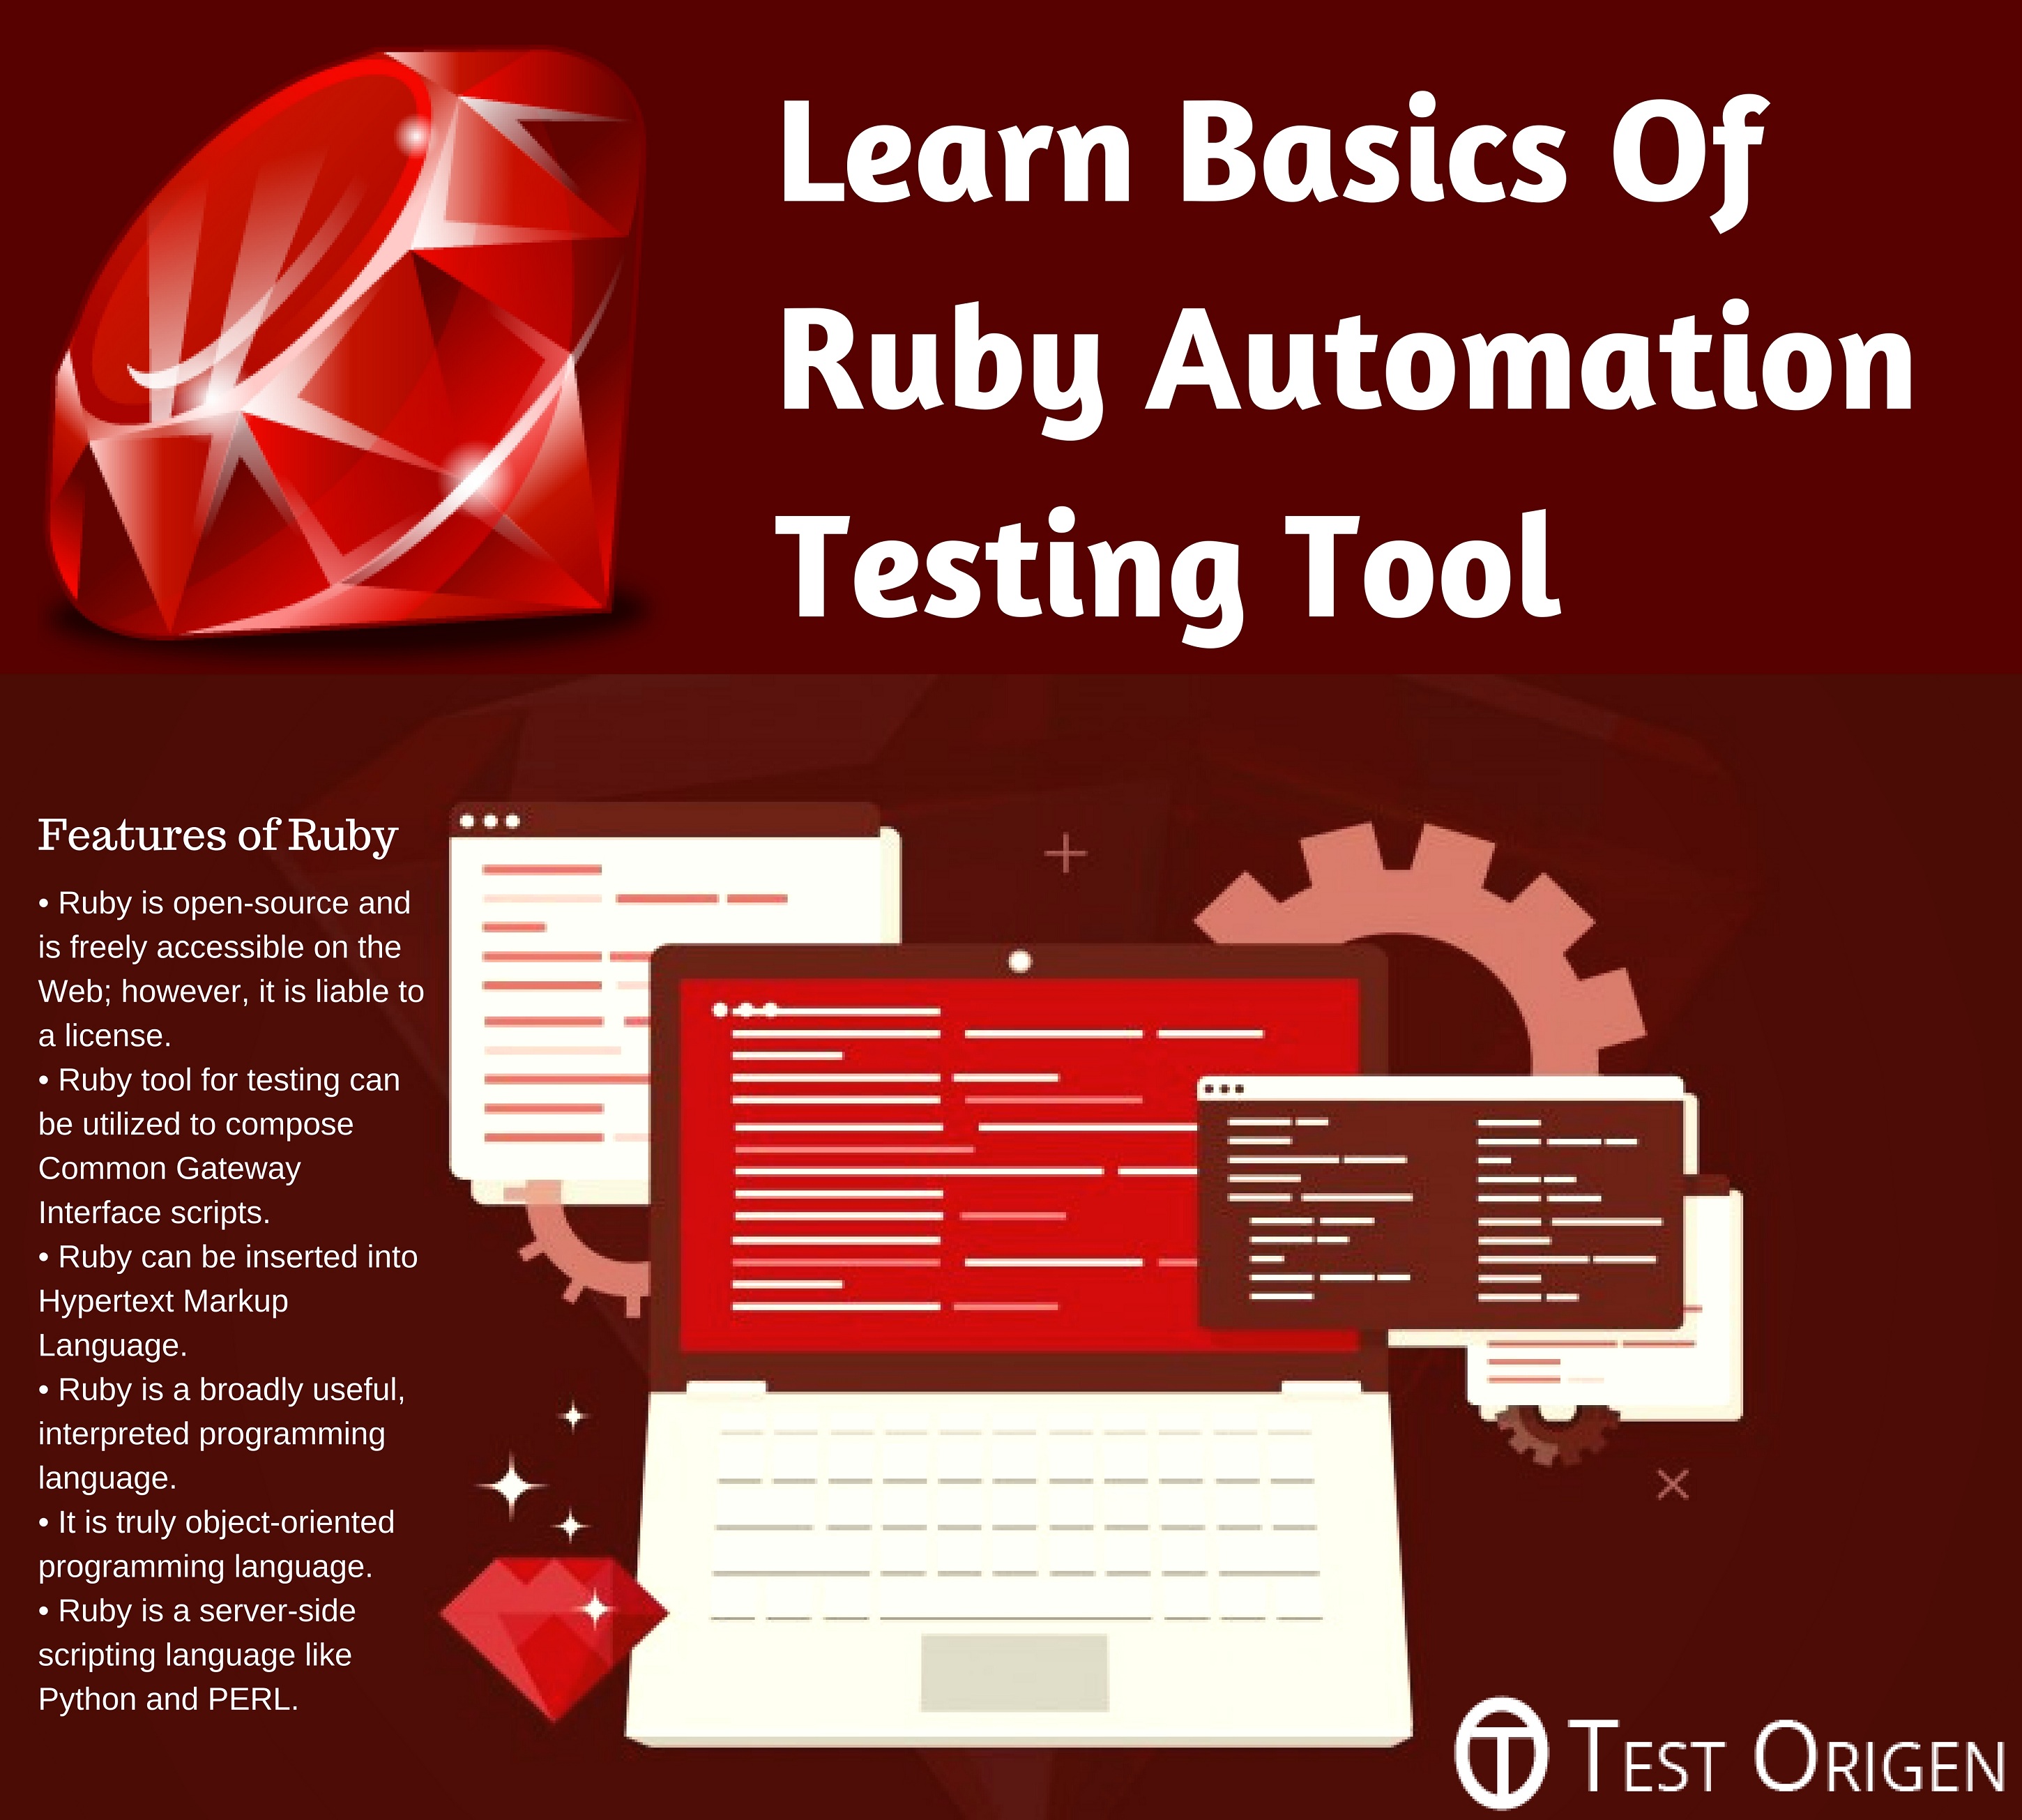 Learn Basics of Ruby Automation Testing Tool